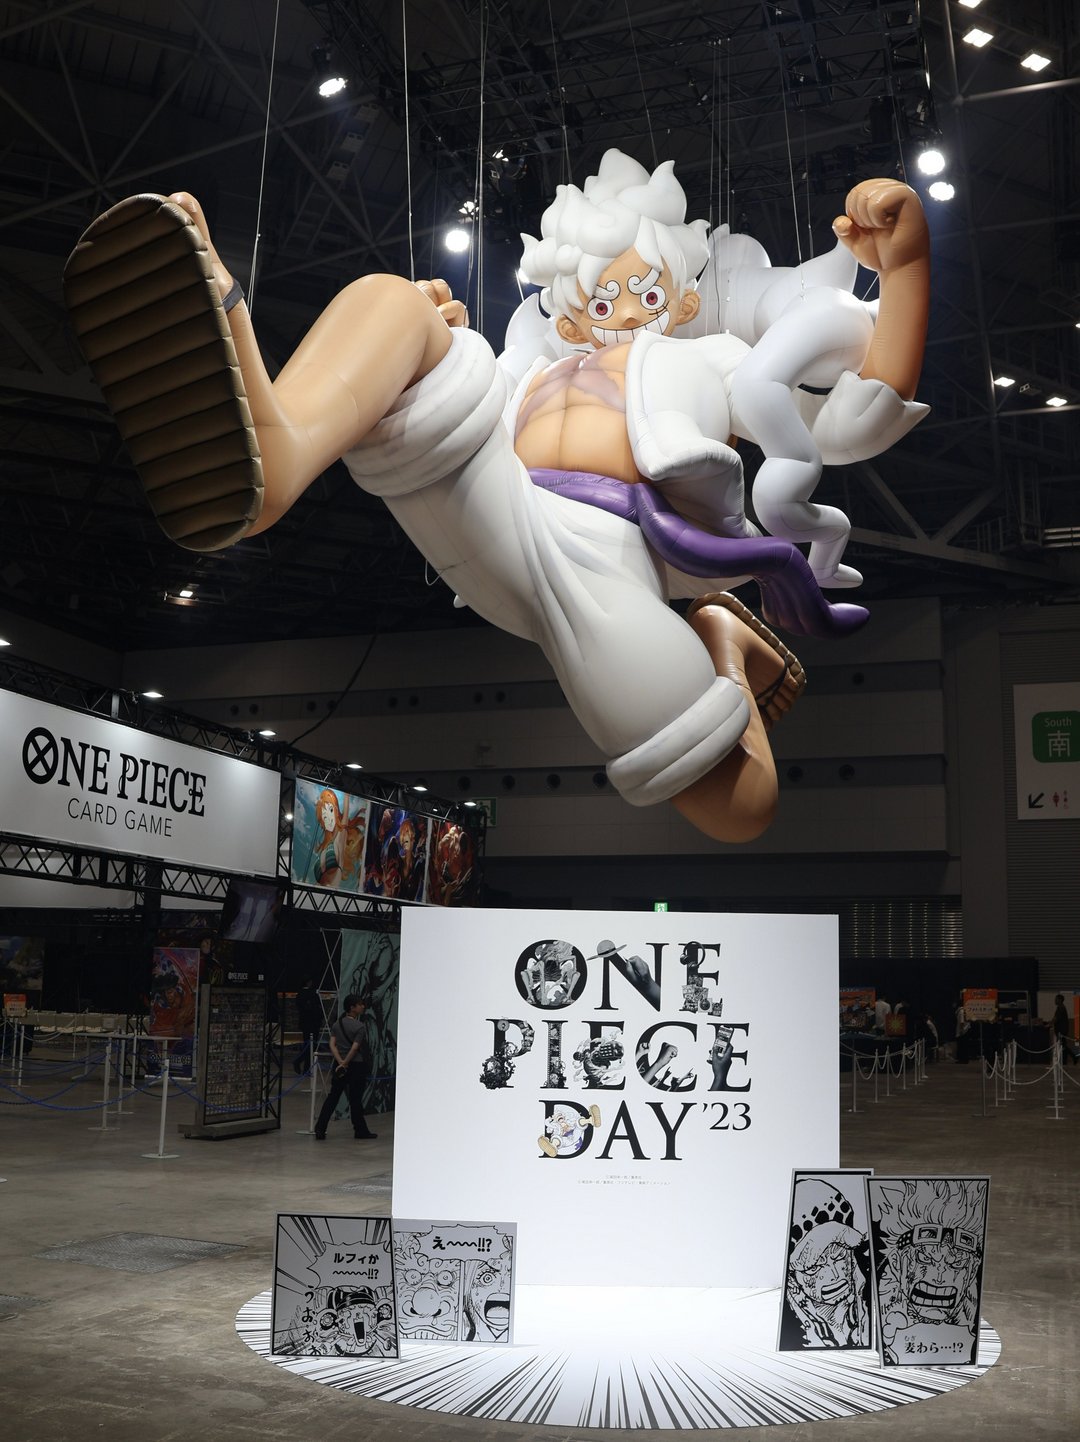 One Piece Day 2023: Gear 5 New Opening and Ending in 2023